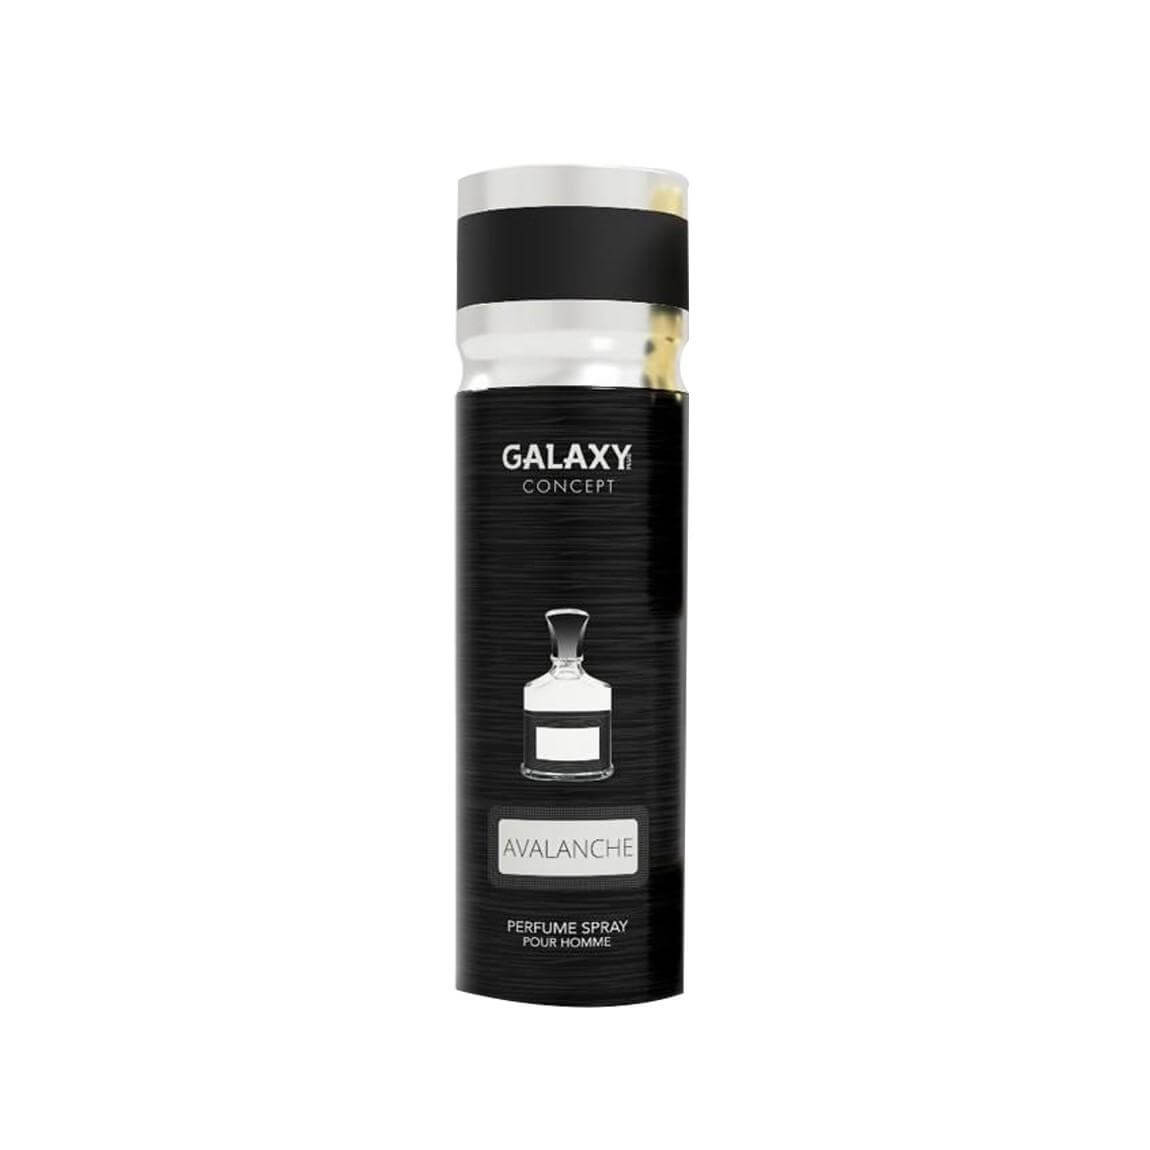 Galaxy Concept Avalanche 200Ml Parfum Spray Pour Homme (Inspired By Creed Aventus)